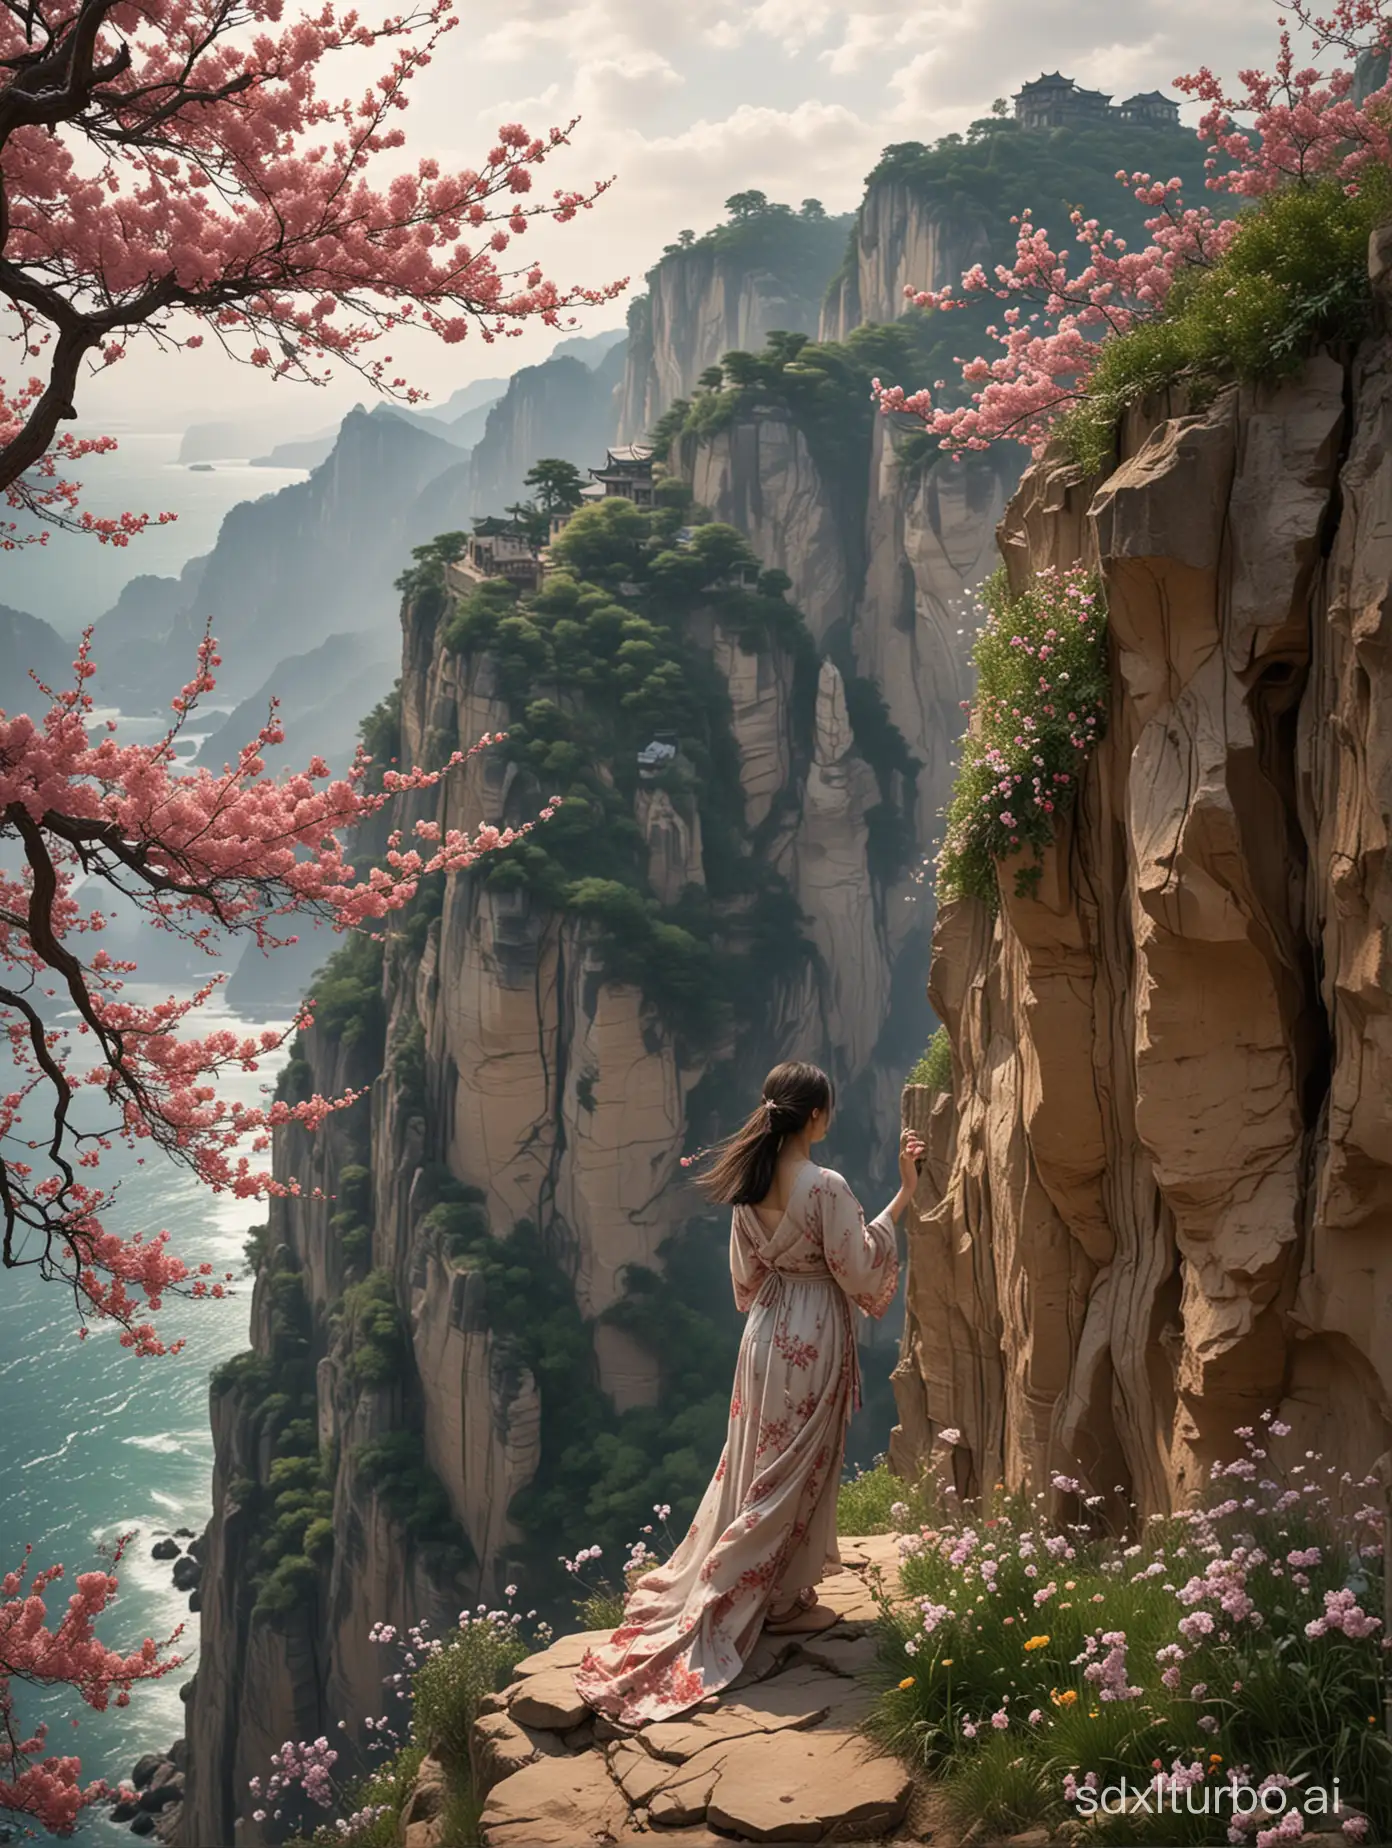 Chinese-Girl-in-Tattered-Dress-at-Cliffs-Edge-with-Blooming-Tree-and-Gazing-Boy